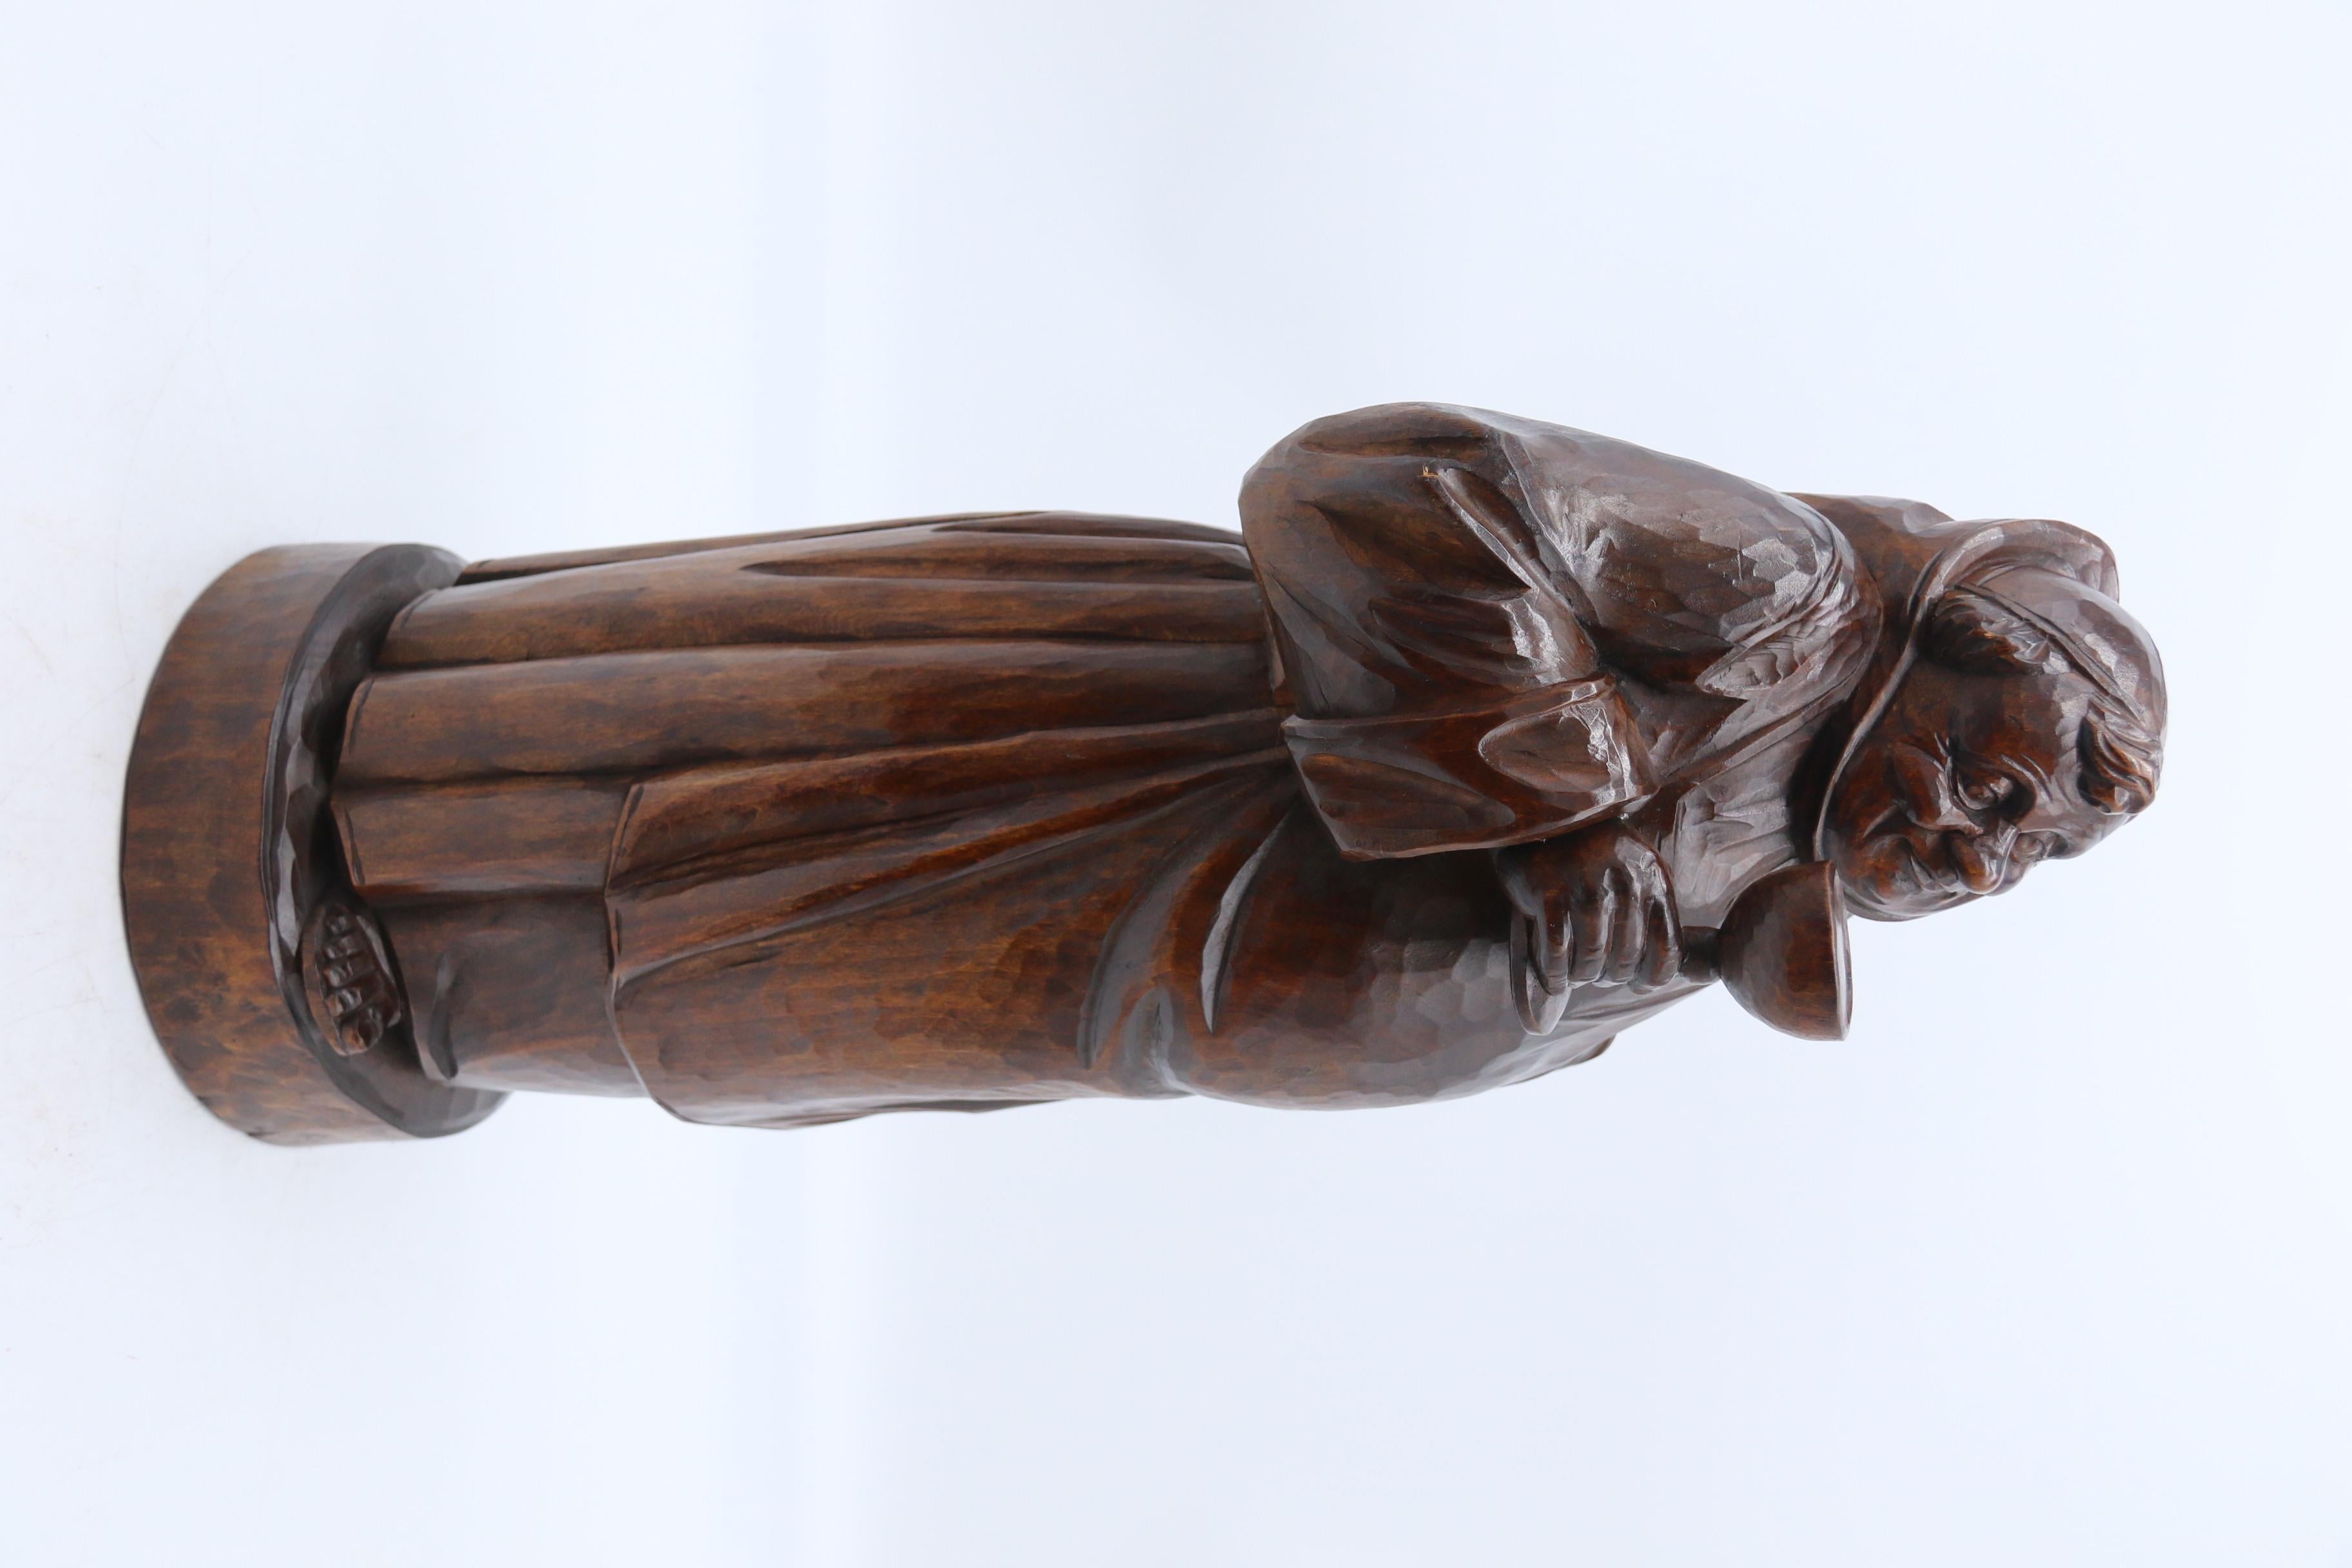 This most impressive large scale Black Forest limewood figure is beautifully carved and depicts the full standing figure of a portly monk dressed in a simple habit cheerfully enjoying a large goblet of wine or maybe several judging by his